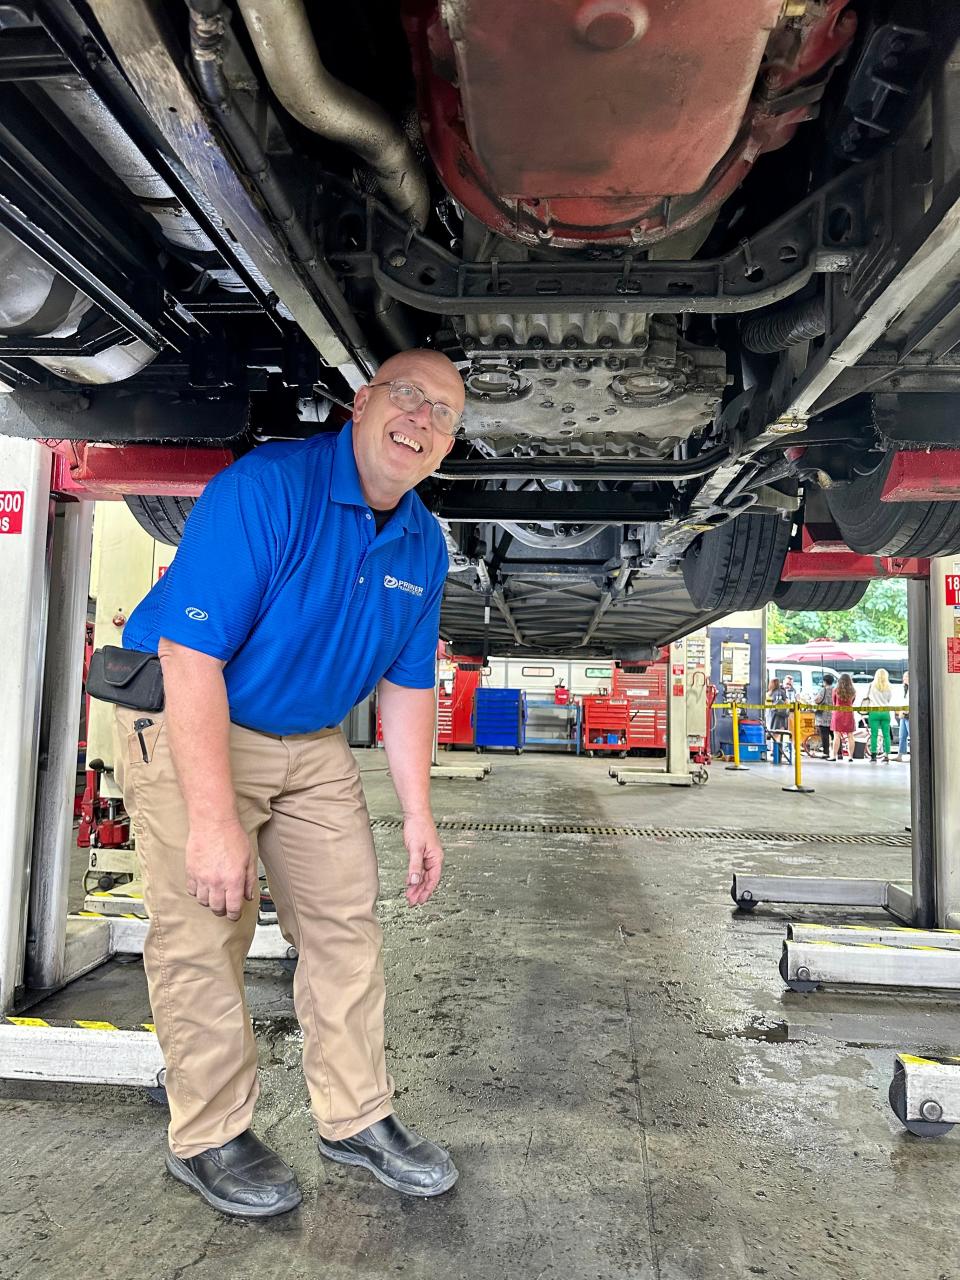 A service department employee wasn’t thrown under the bus – he’s fine with checking it out from below. Premier Transportation – East Tennessee’s top-tier coach service, trusted by the UT Volunteers – recently hosted “Breakfast & Buses” at their company headquarters in North Knoxville. Aug. 15, 2023